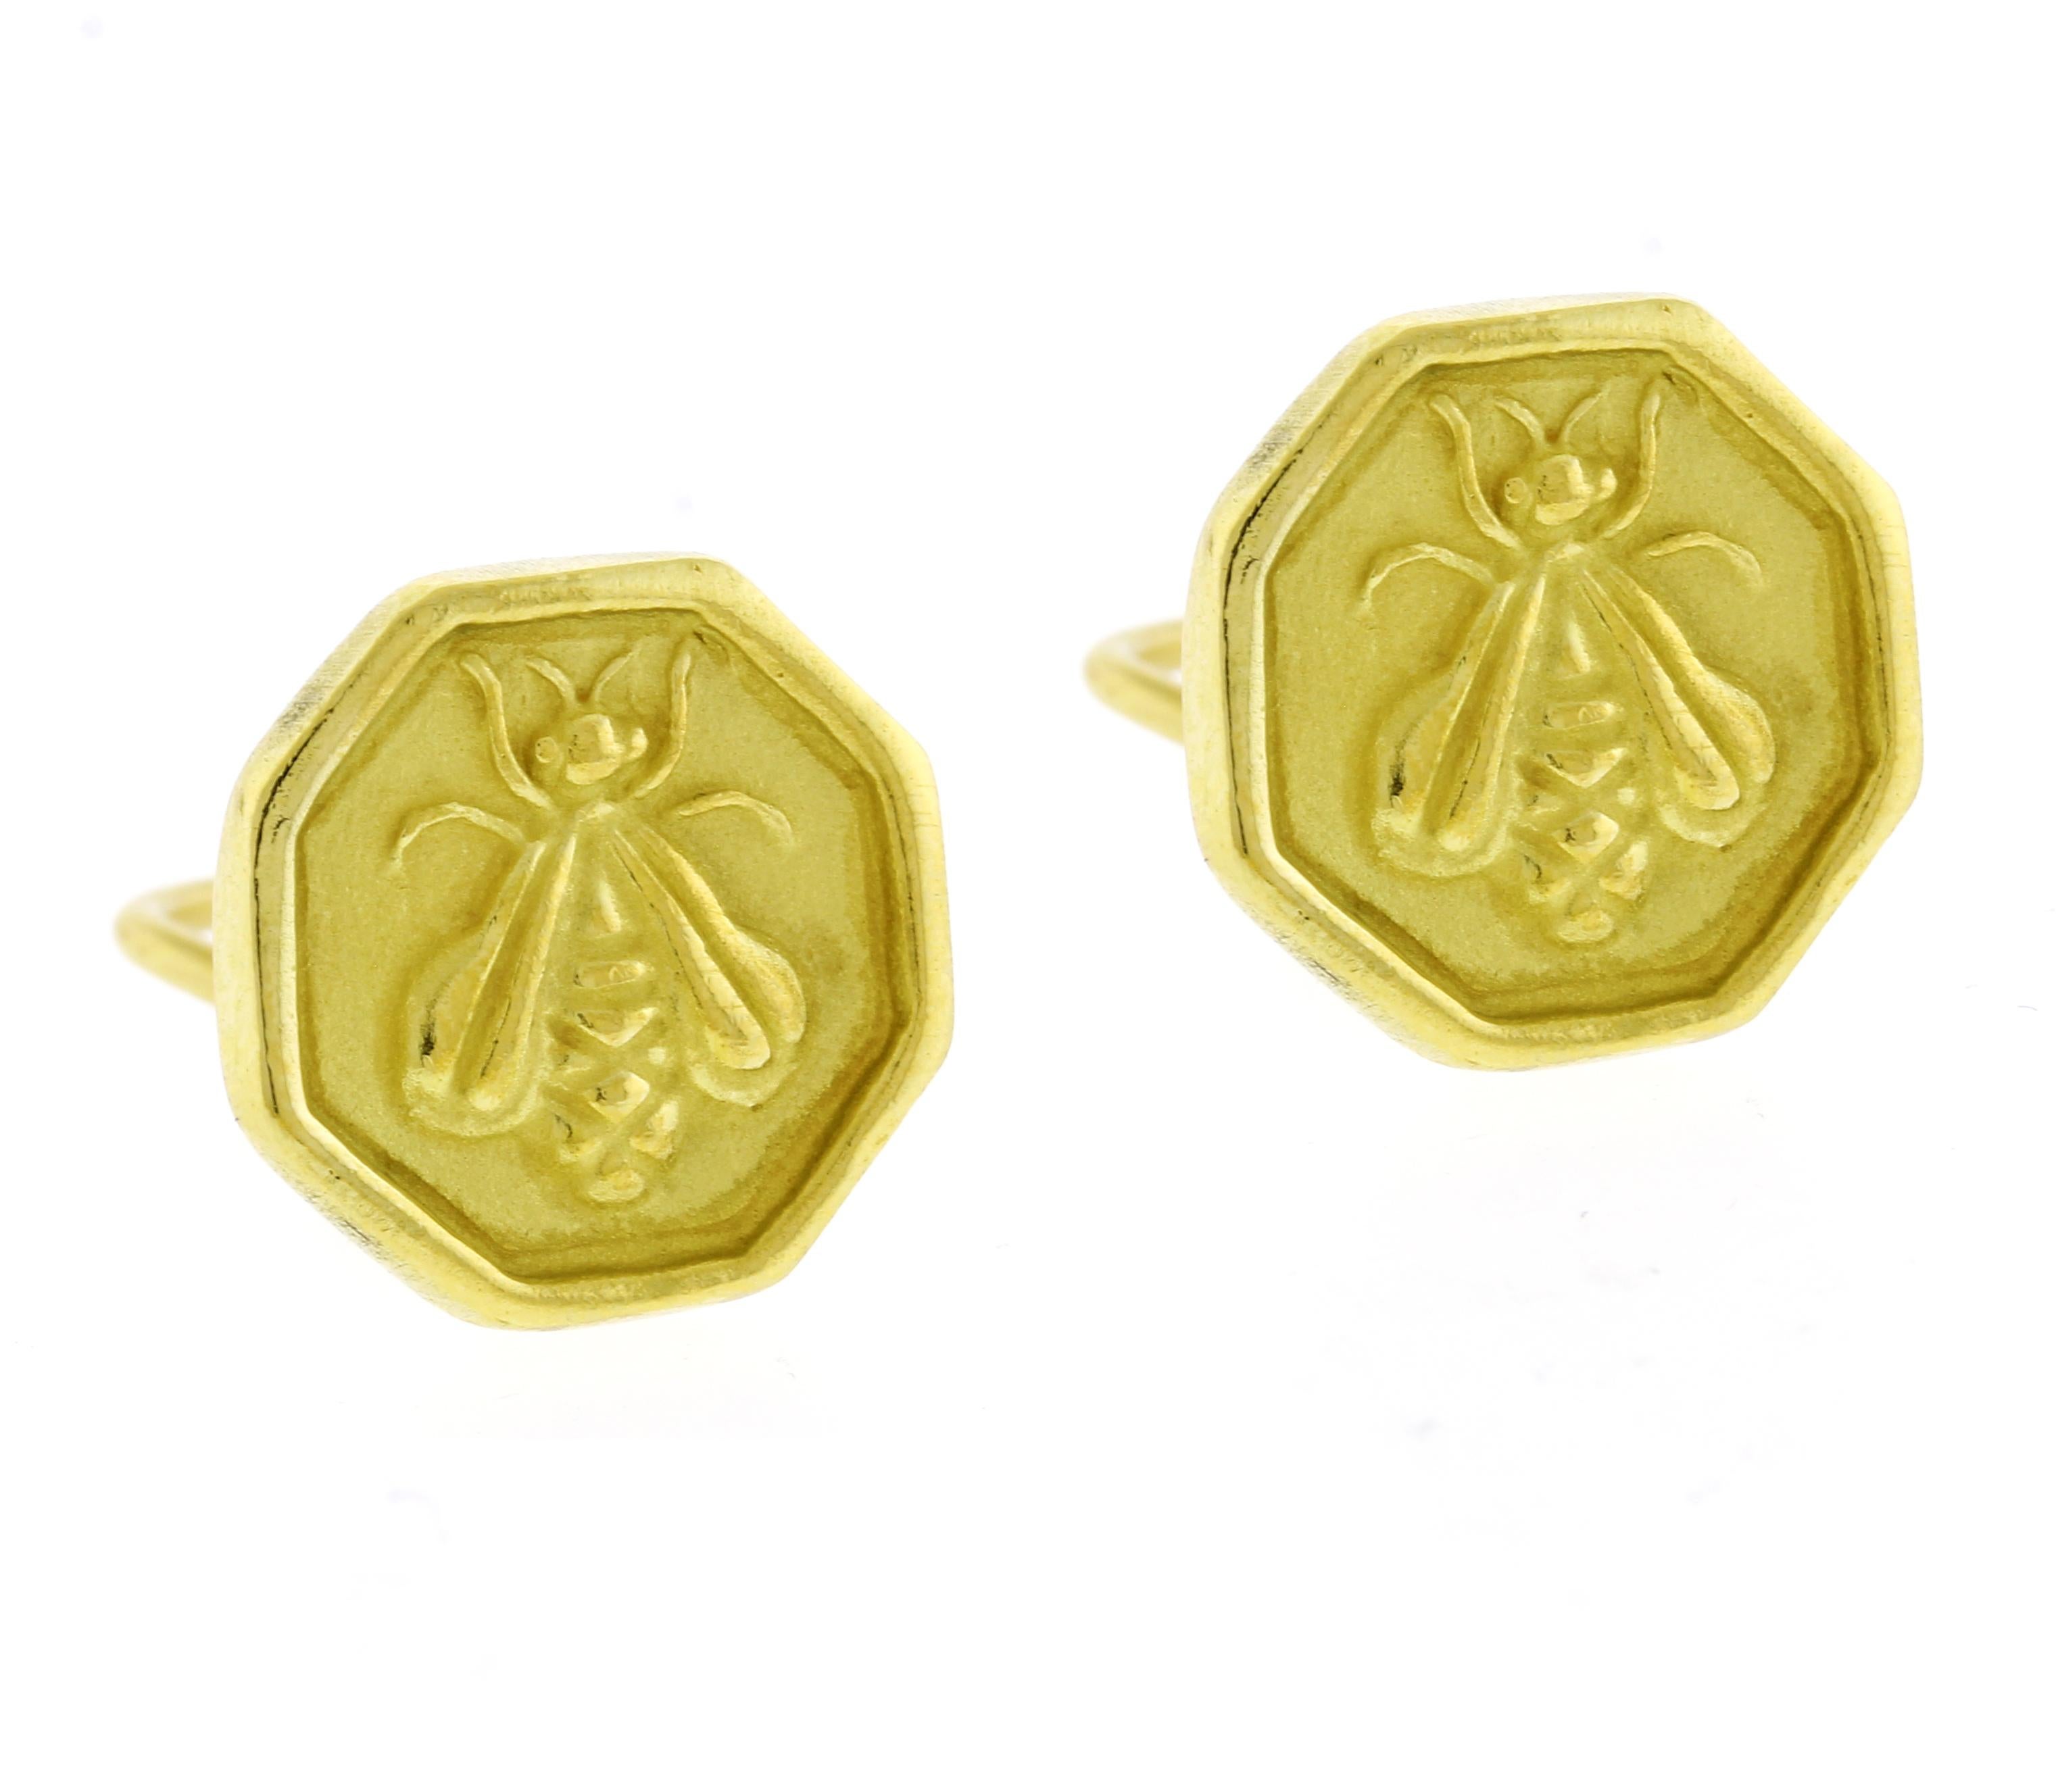 From sisters Landon and Heath Slane a pair of thier iconic honeycomb hexagon bee clip on earrings

♦ Designer: Slane & Slane
♦ Metal: 18 karat
♦ Circa 1990s
♦ 5/8th of an inch square 
♦ 14.4 grams
♦ Packaging: Pampillonia presentation box
♦